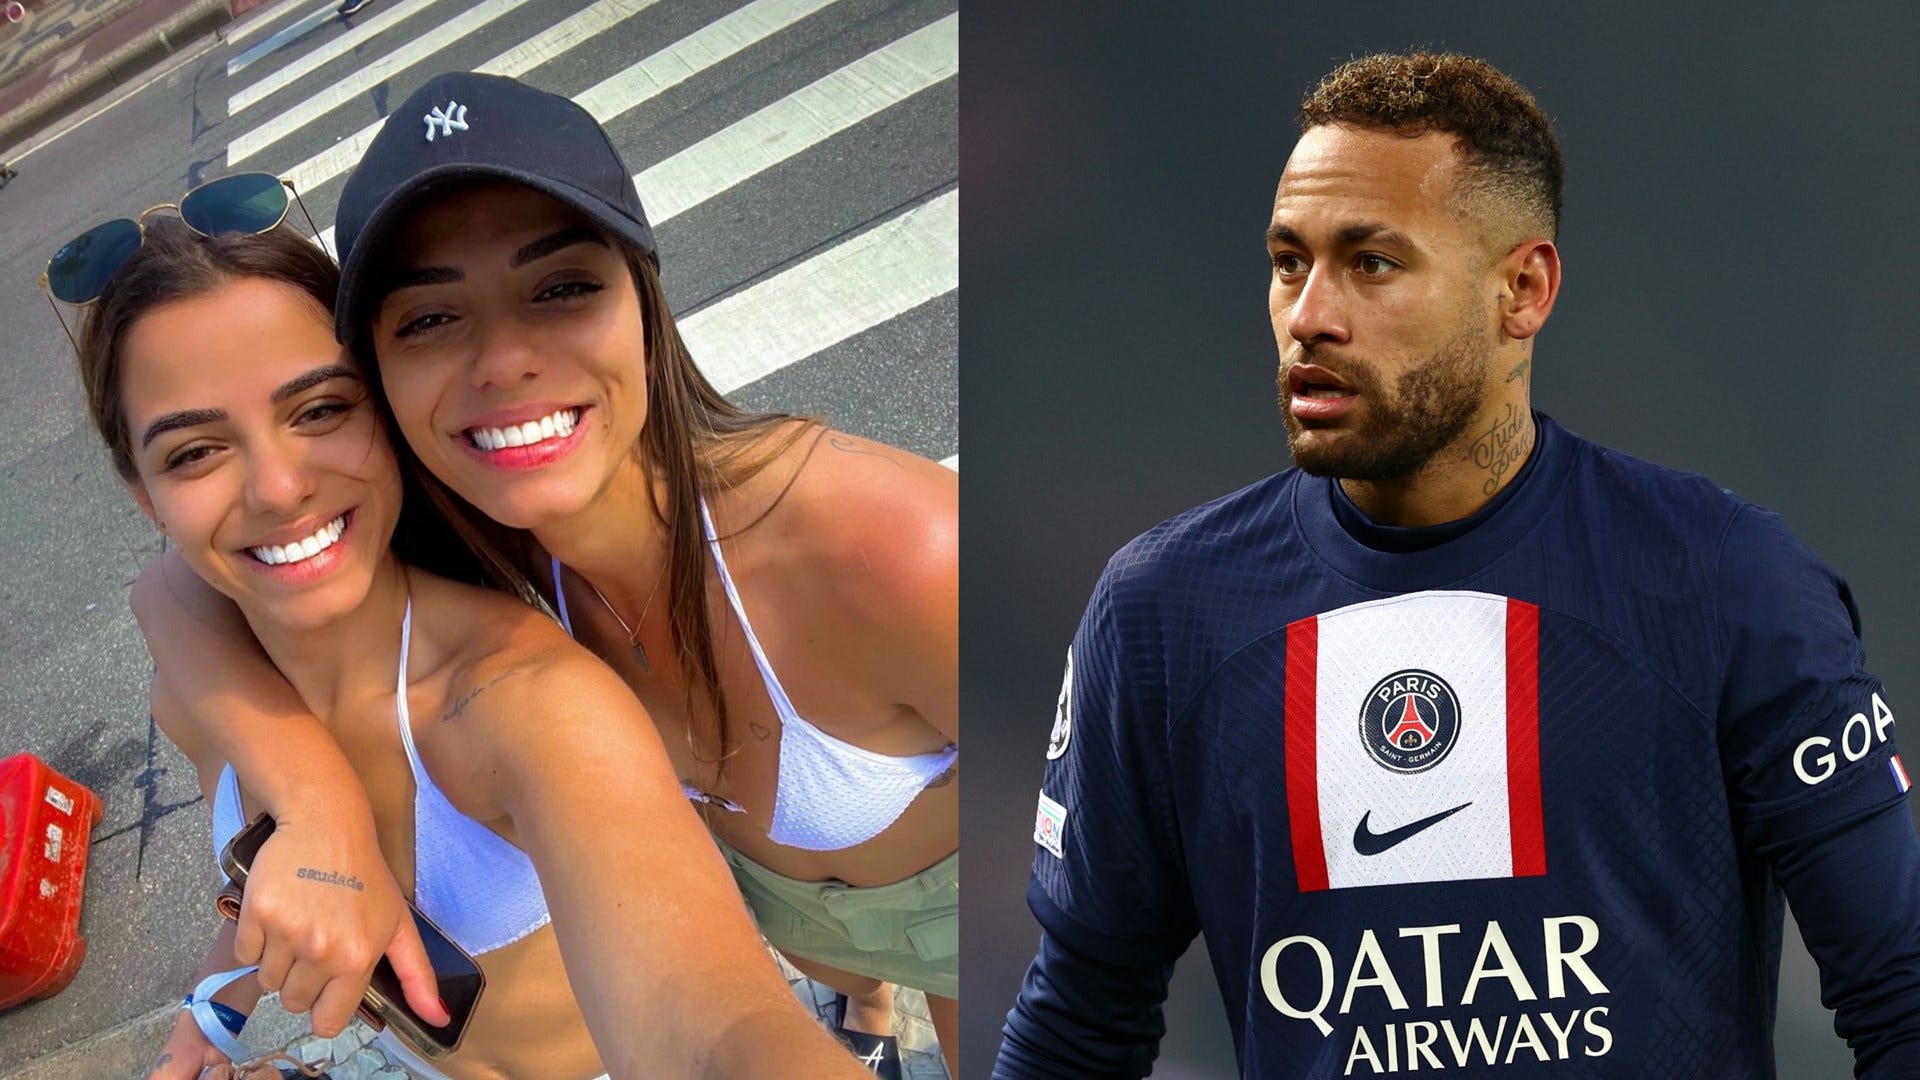 Neymar asked for sex with both of picture